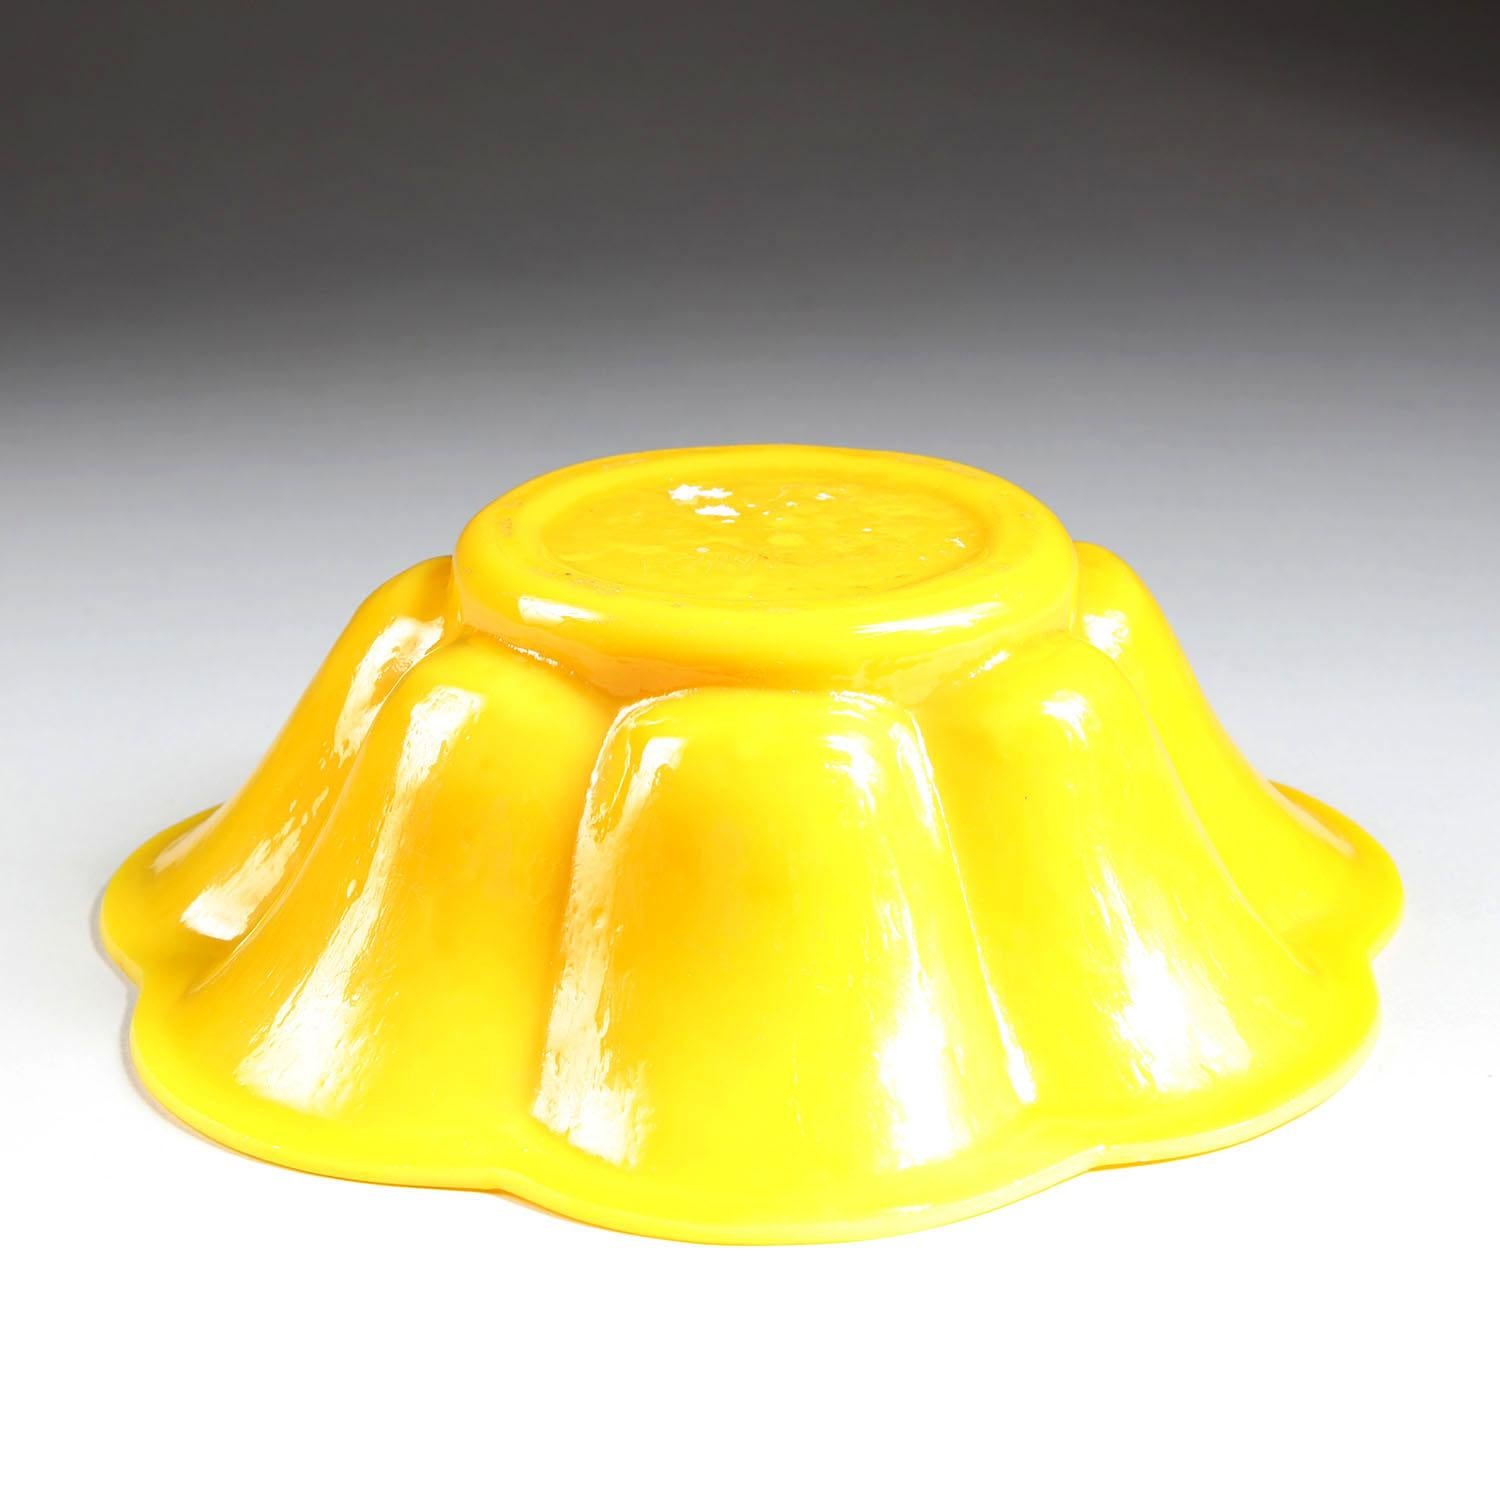 20th Century Chinese Yellow Glass Floriform Bowl In Excellent Condition In London, by appointment only